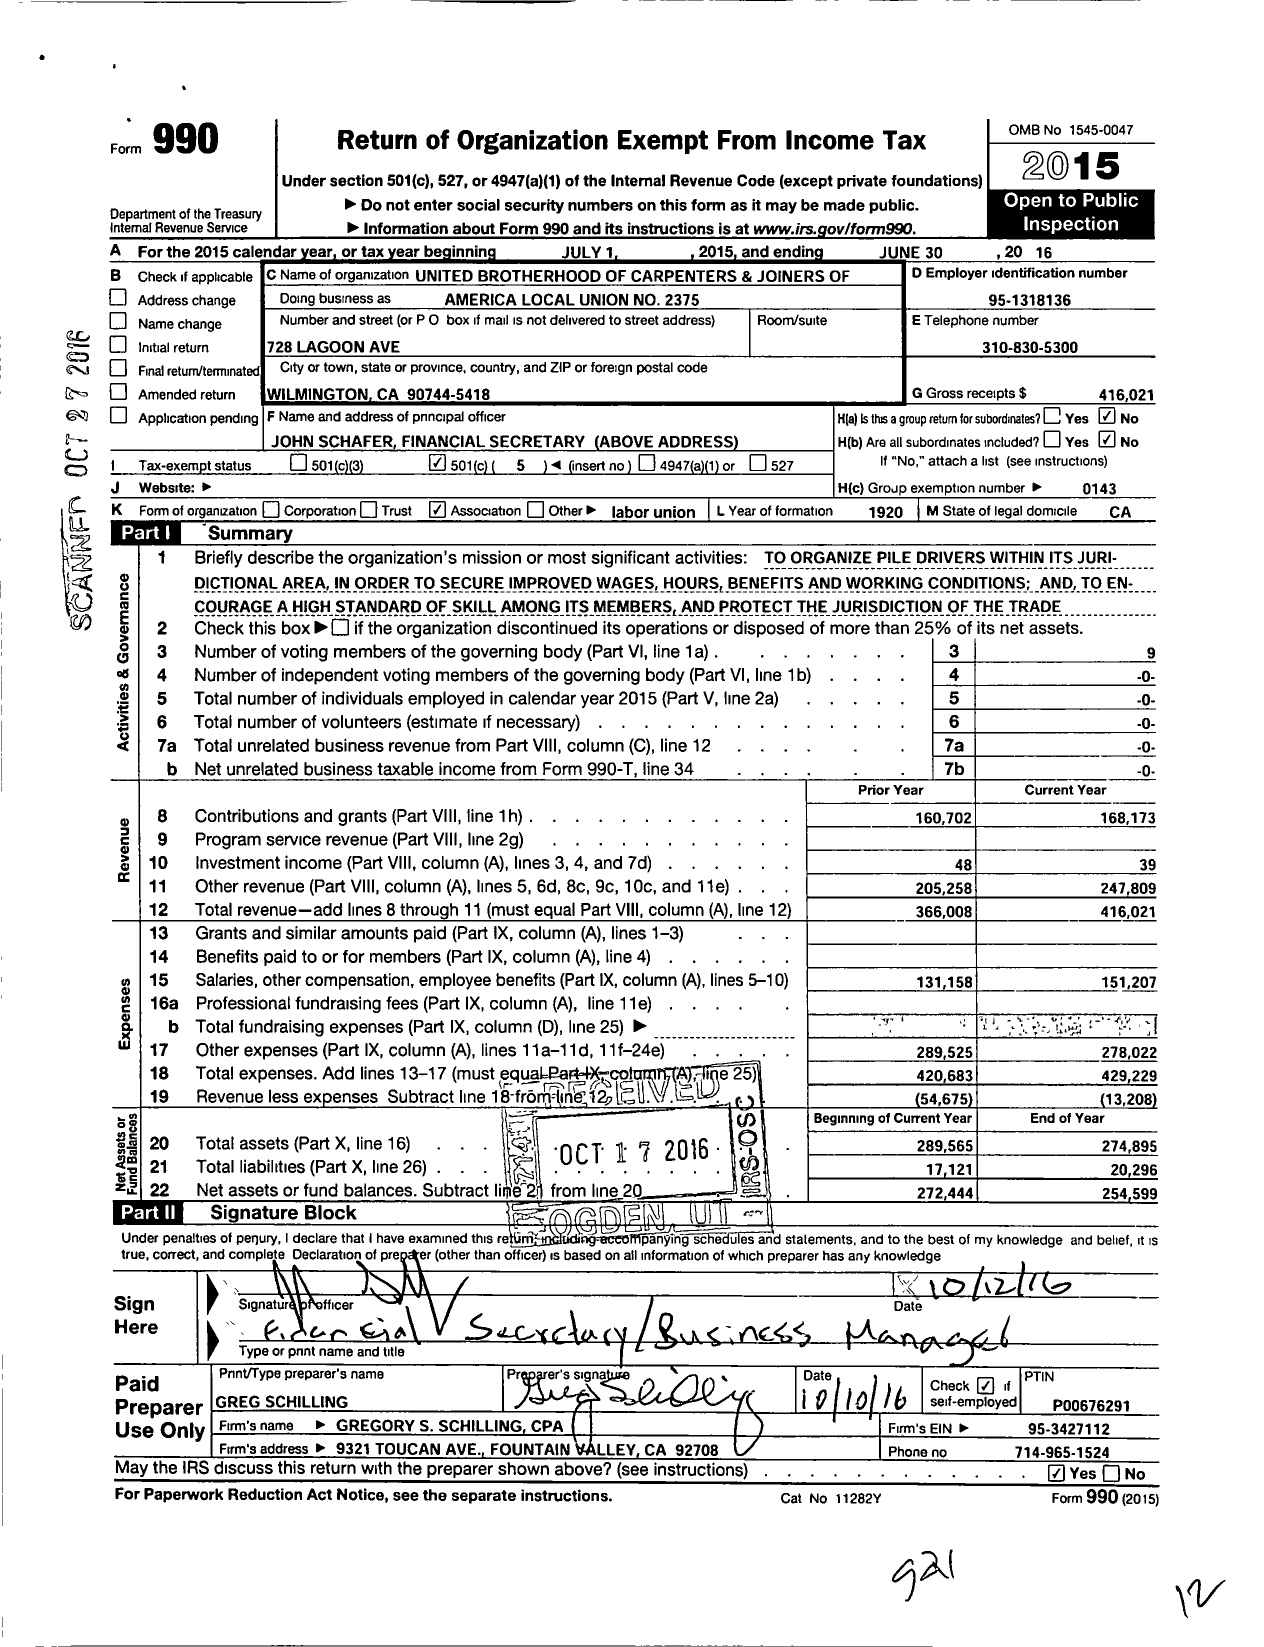 Image of first page of 2015 Form 990O for United Brotherhood of Carpenters & Joiners - 2375 Pile Drivers Local Union